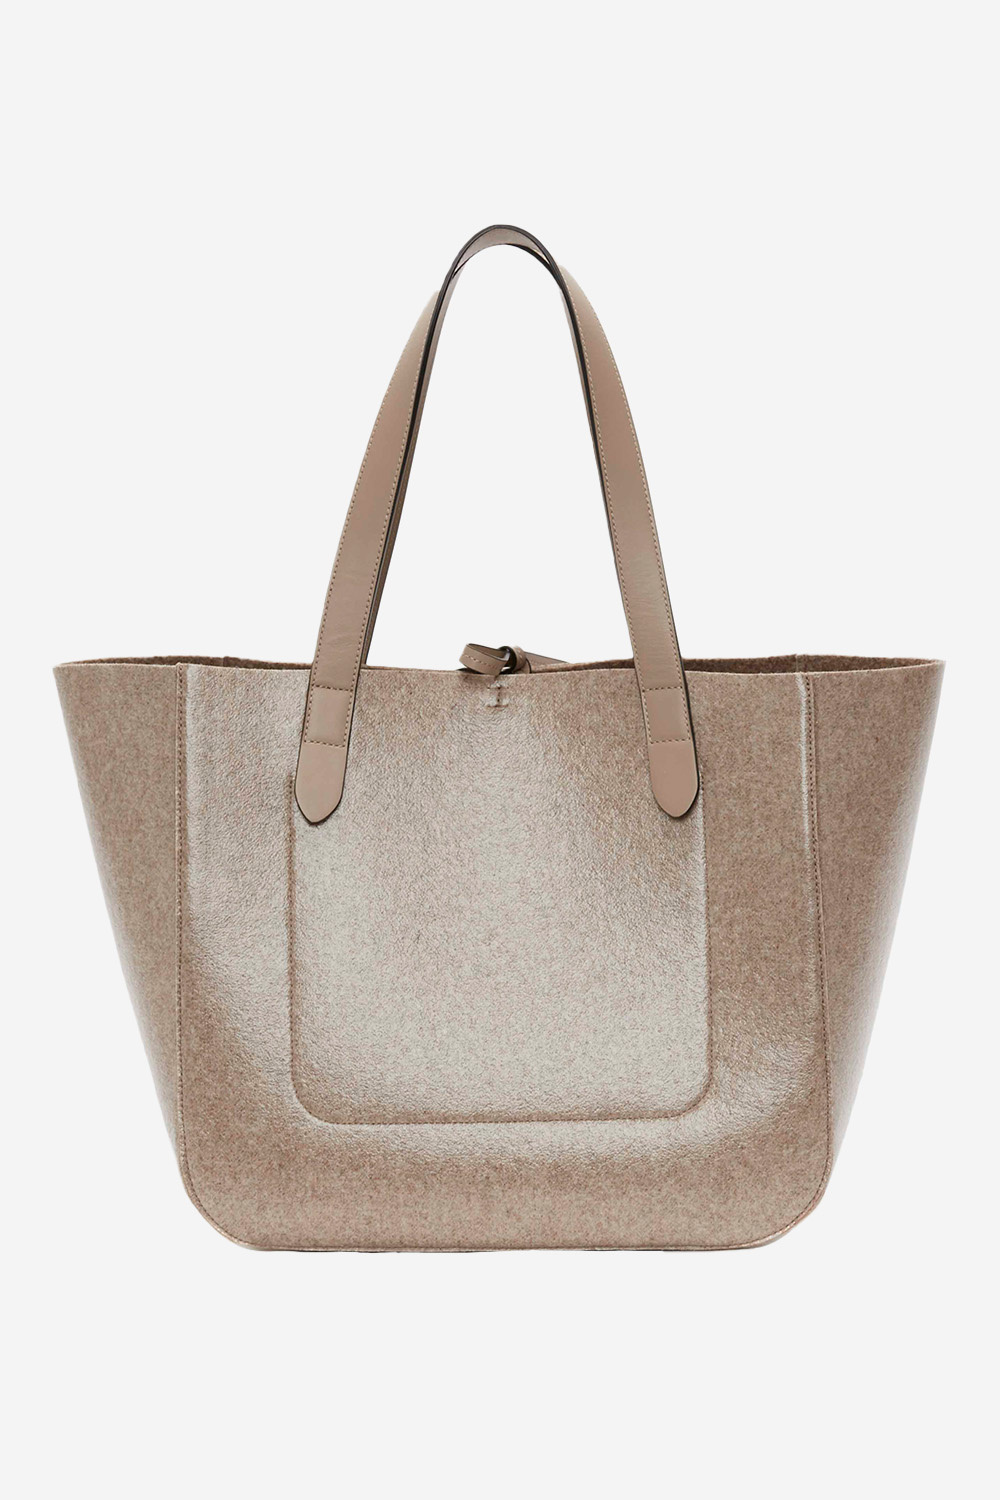 JW Anderson Tote bag Taupe